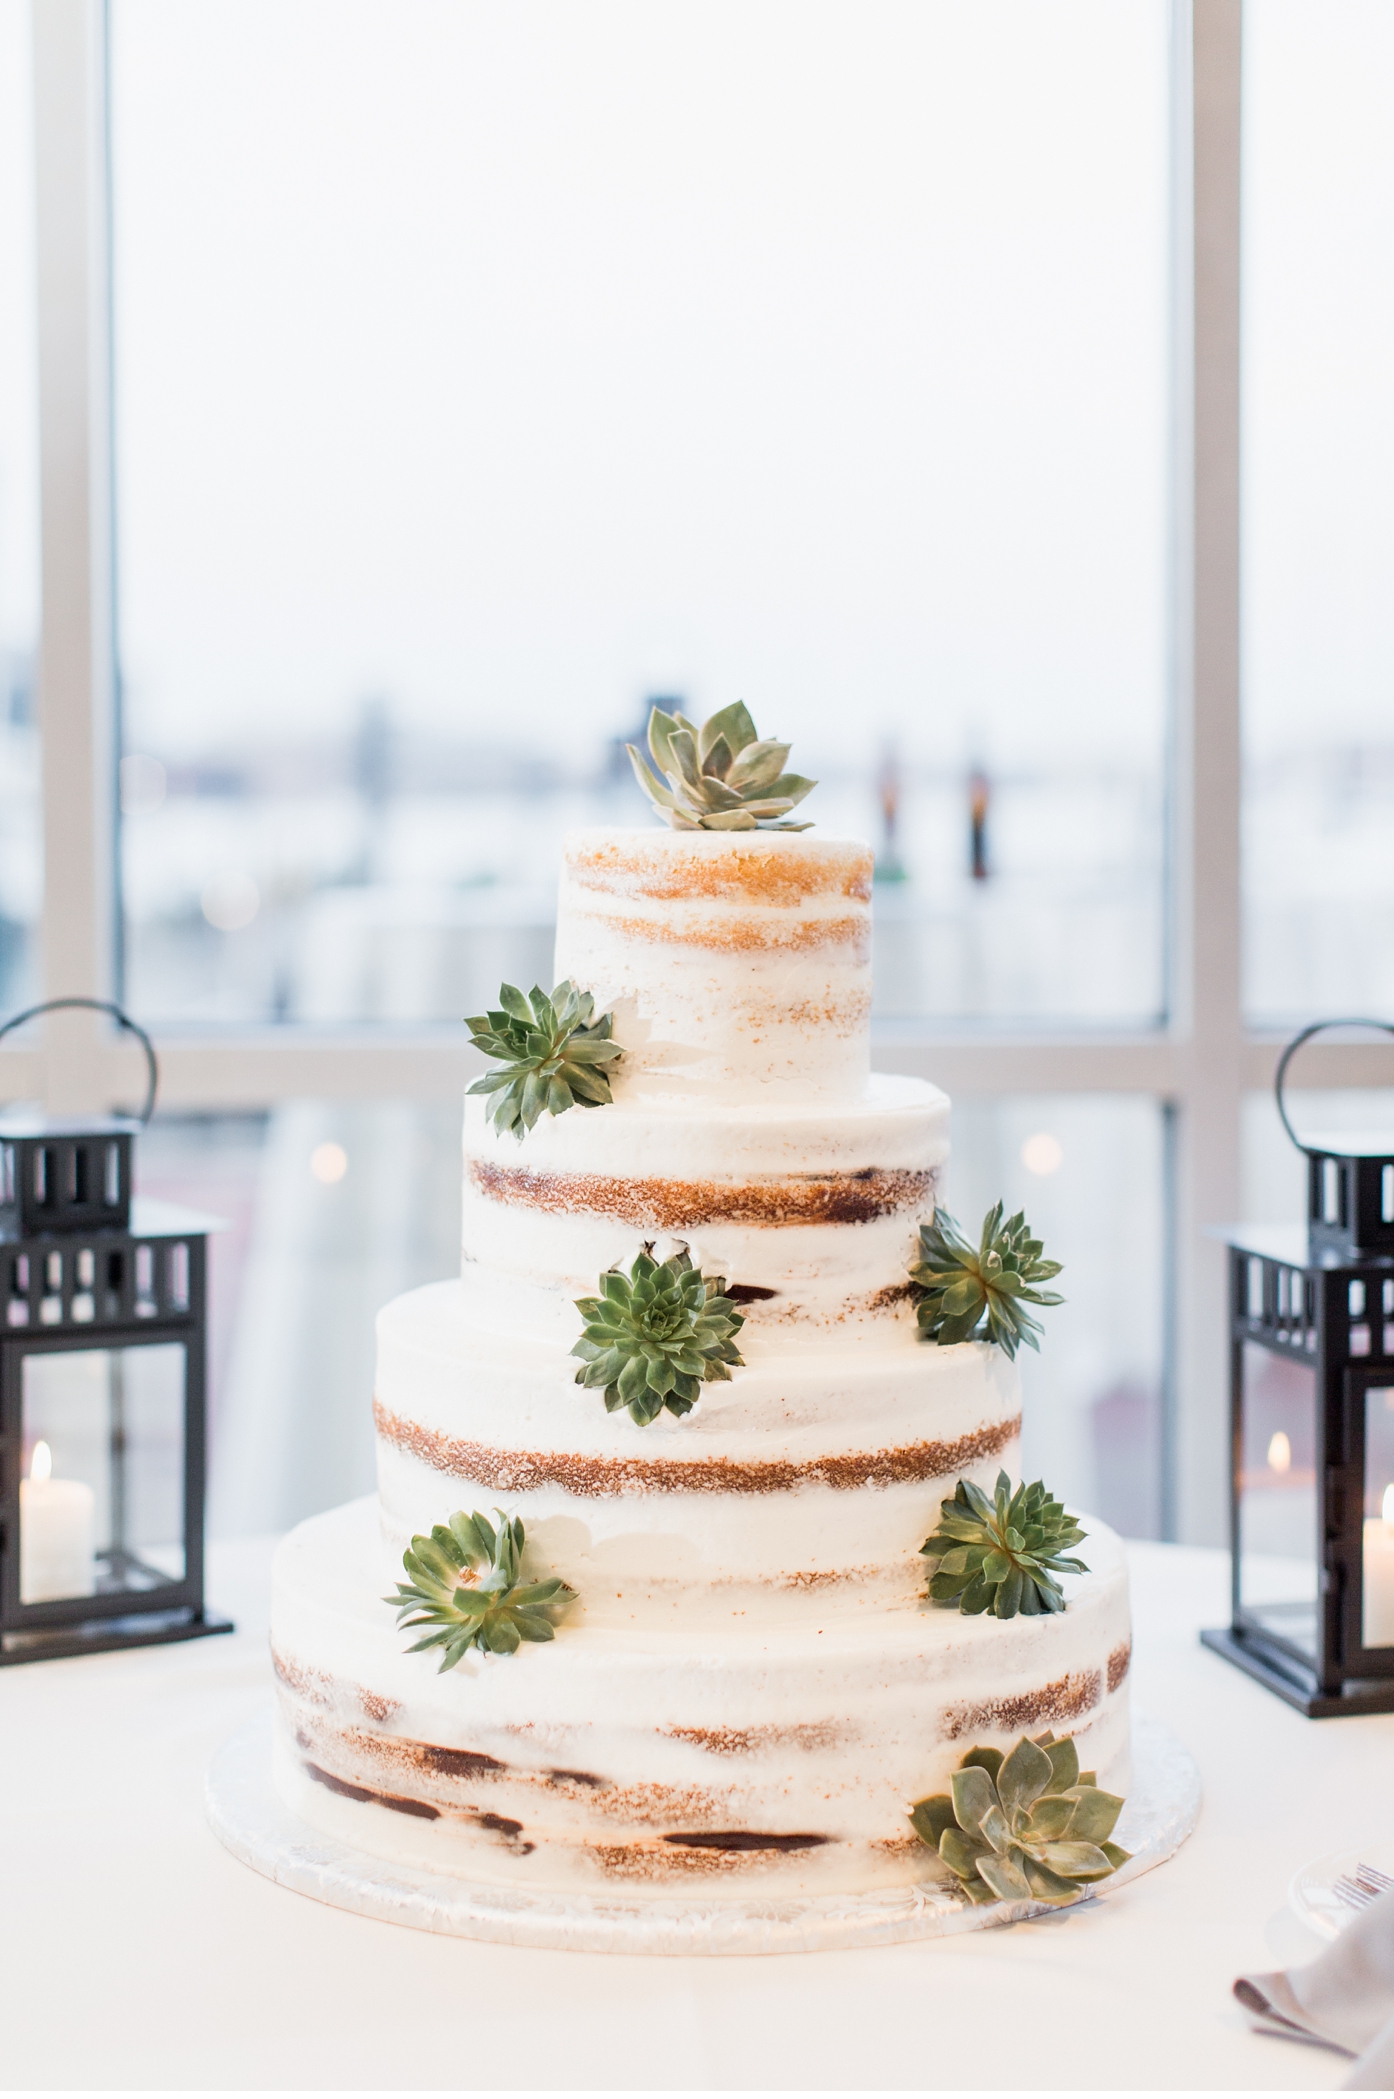 Naked Cake with Succulents